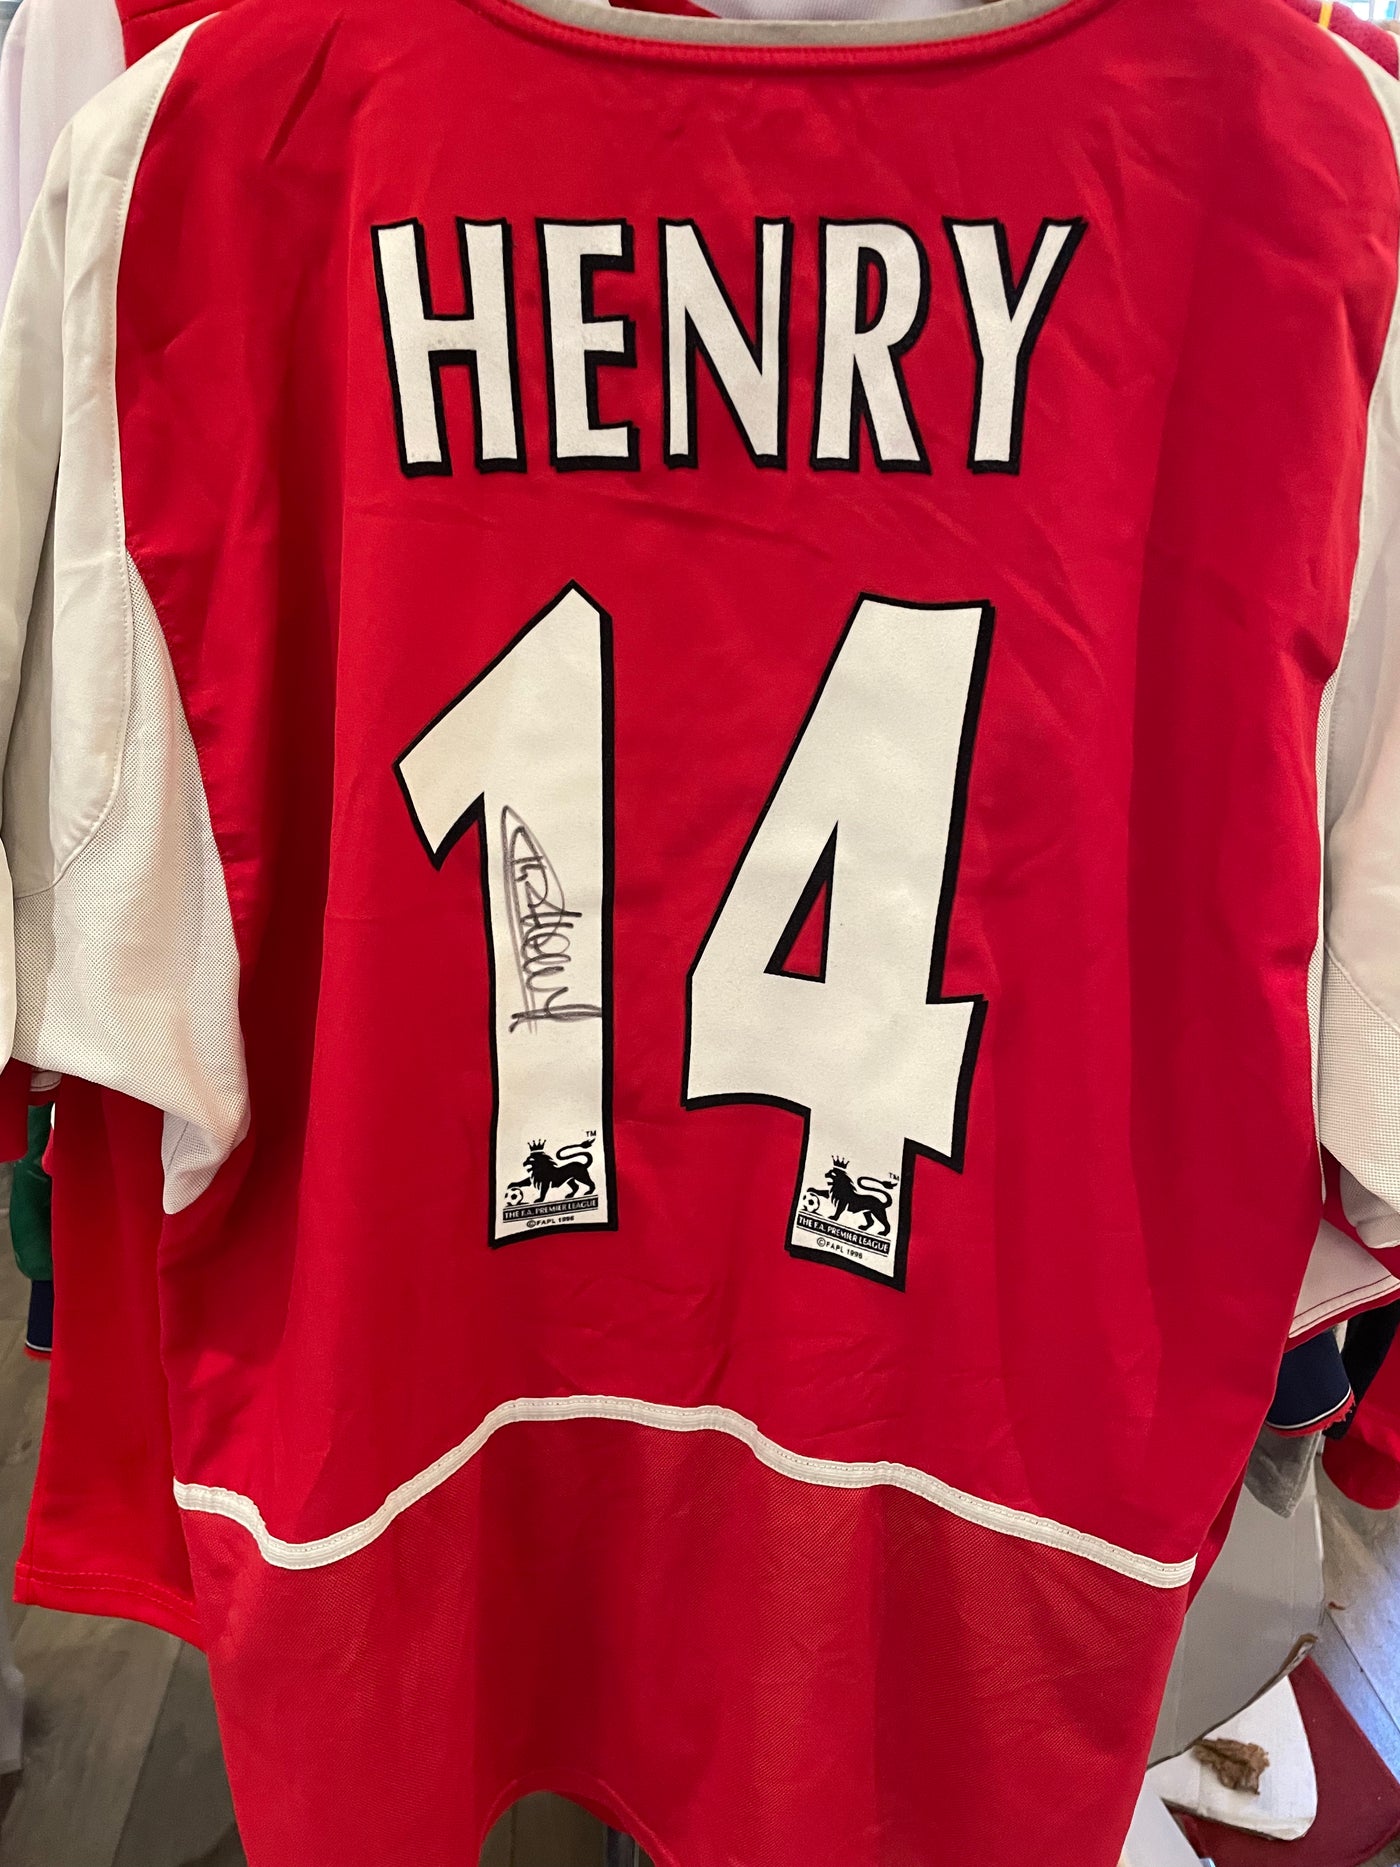 Henry signed invincibles shirt